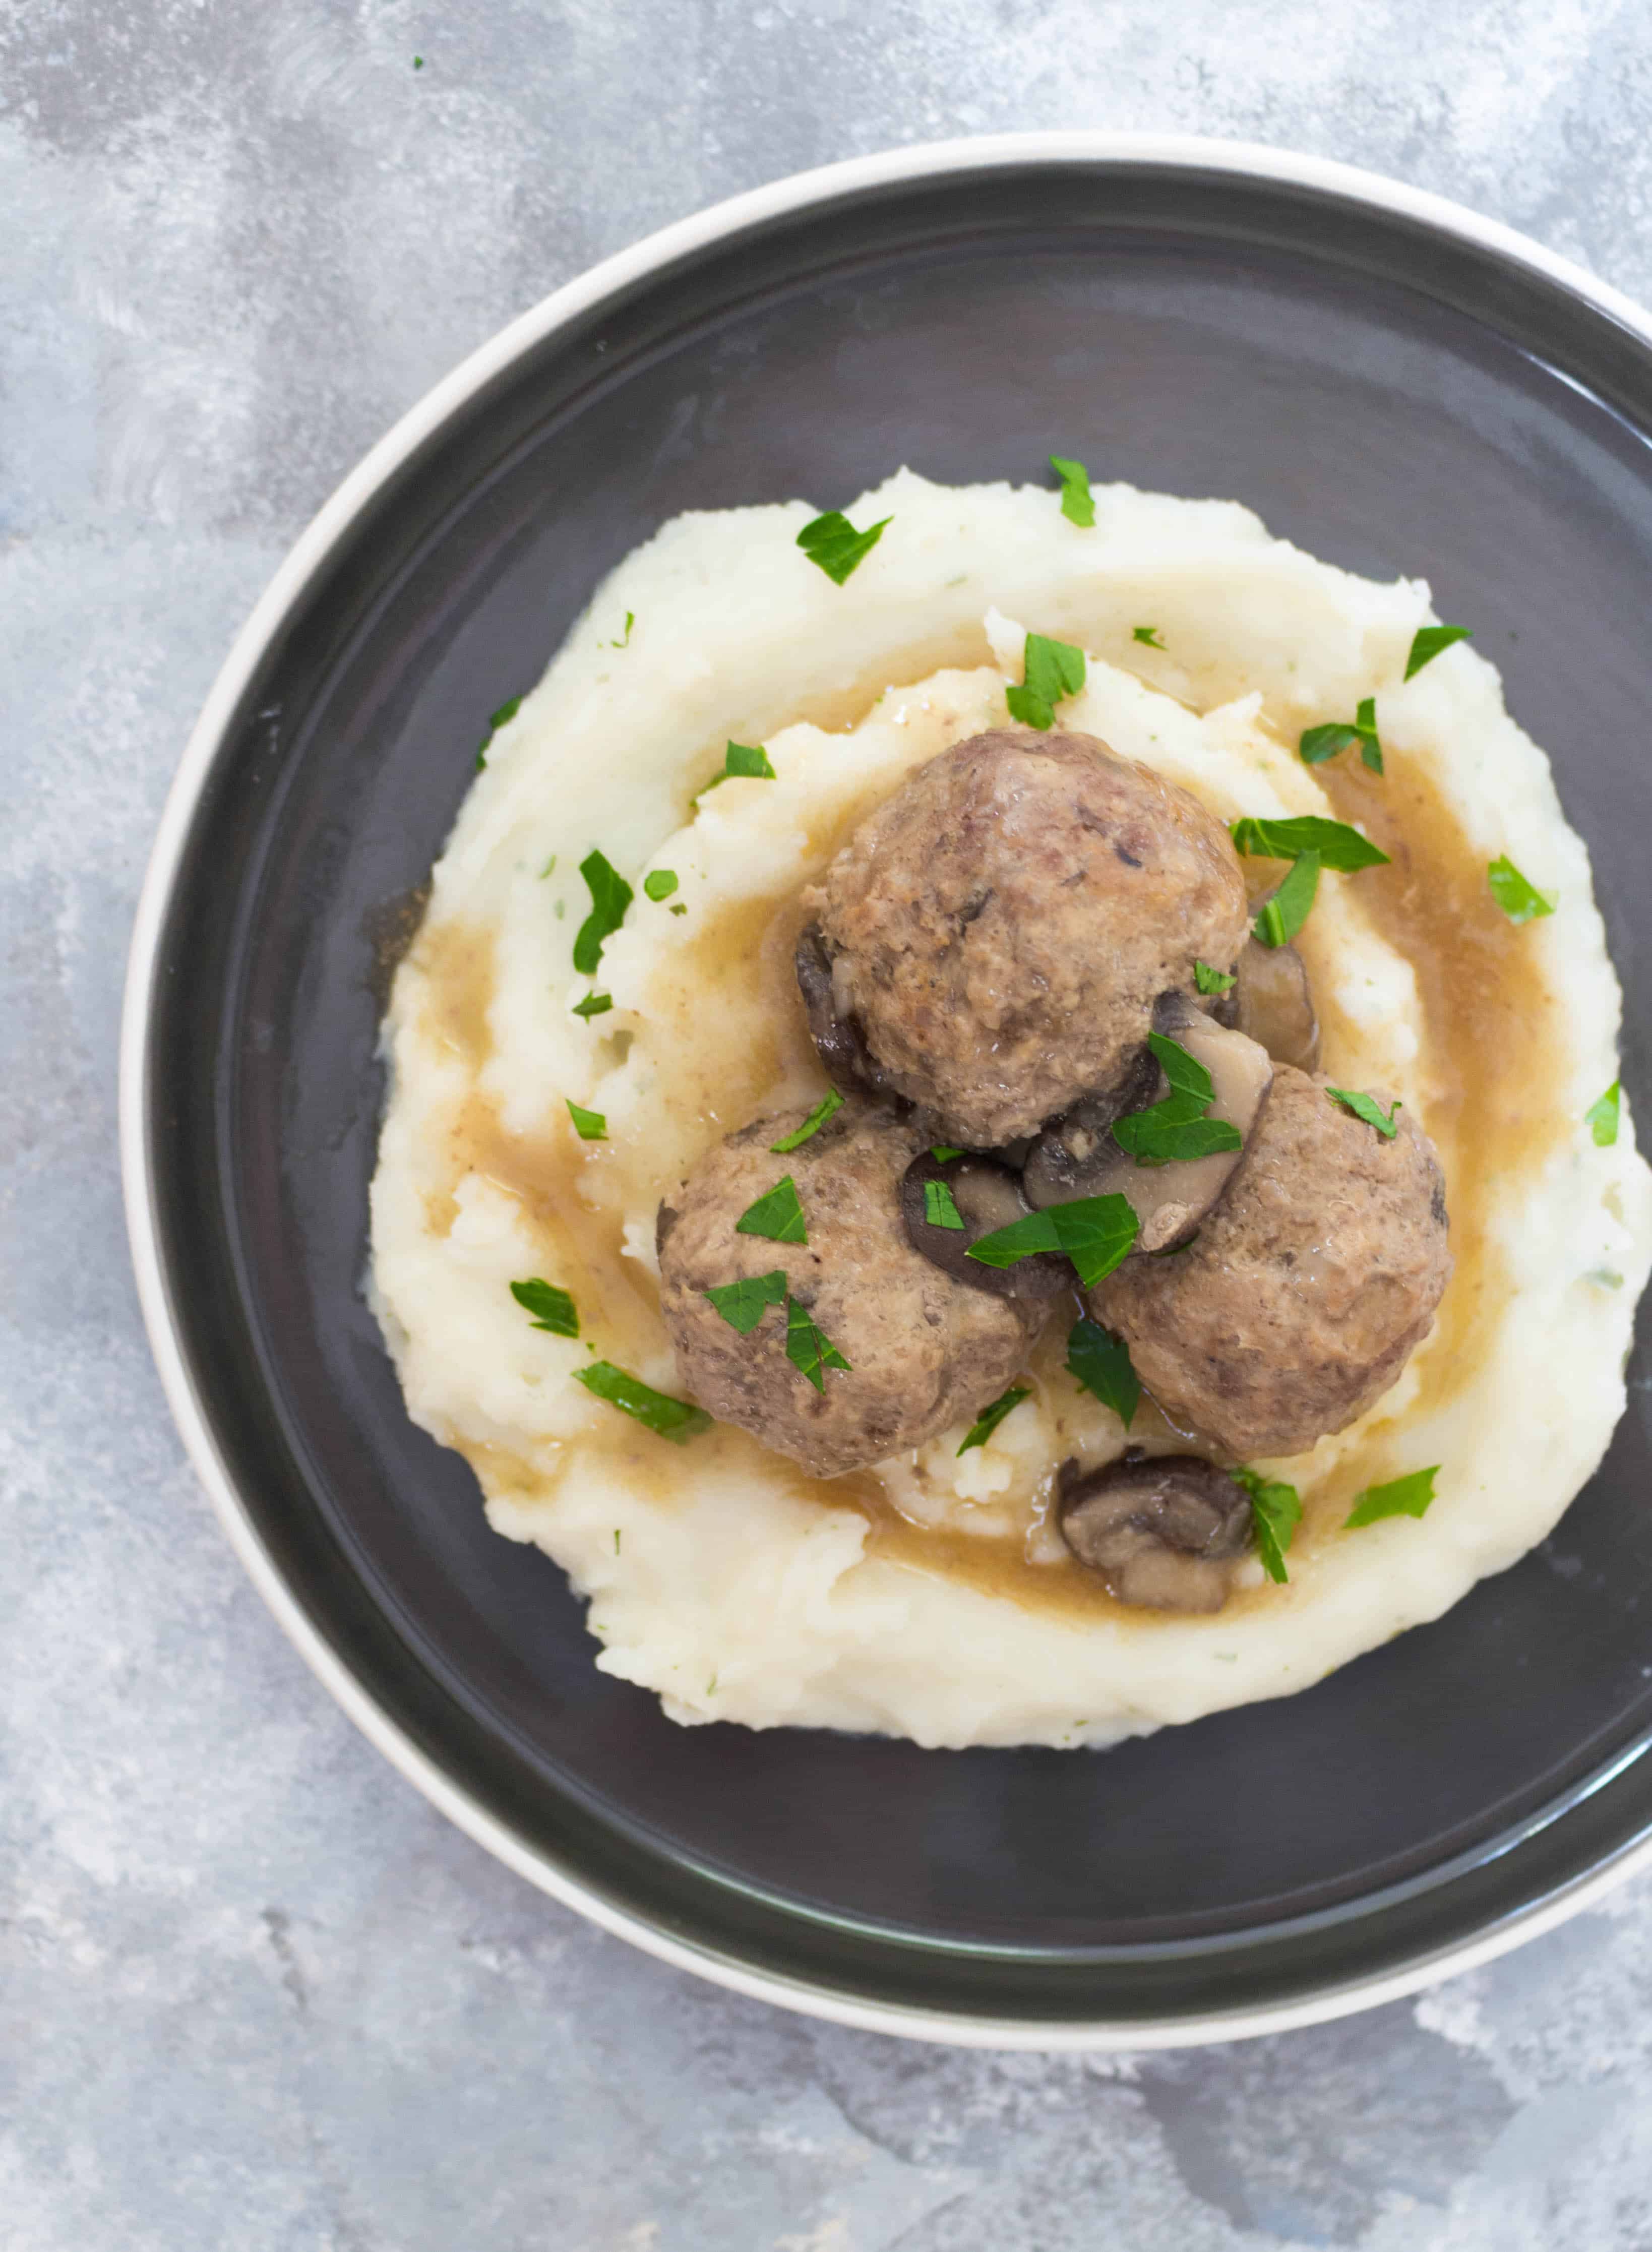 This Instant Pot Salisbury Steak Meatballs Recipe is inspired by the salisbury steak frozen dinners in the frozen food aisle. These yummy salisbury steak meatballs are lightened up by using both turkey meat and beef with mushrooms and take under 30 minutes to make!